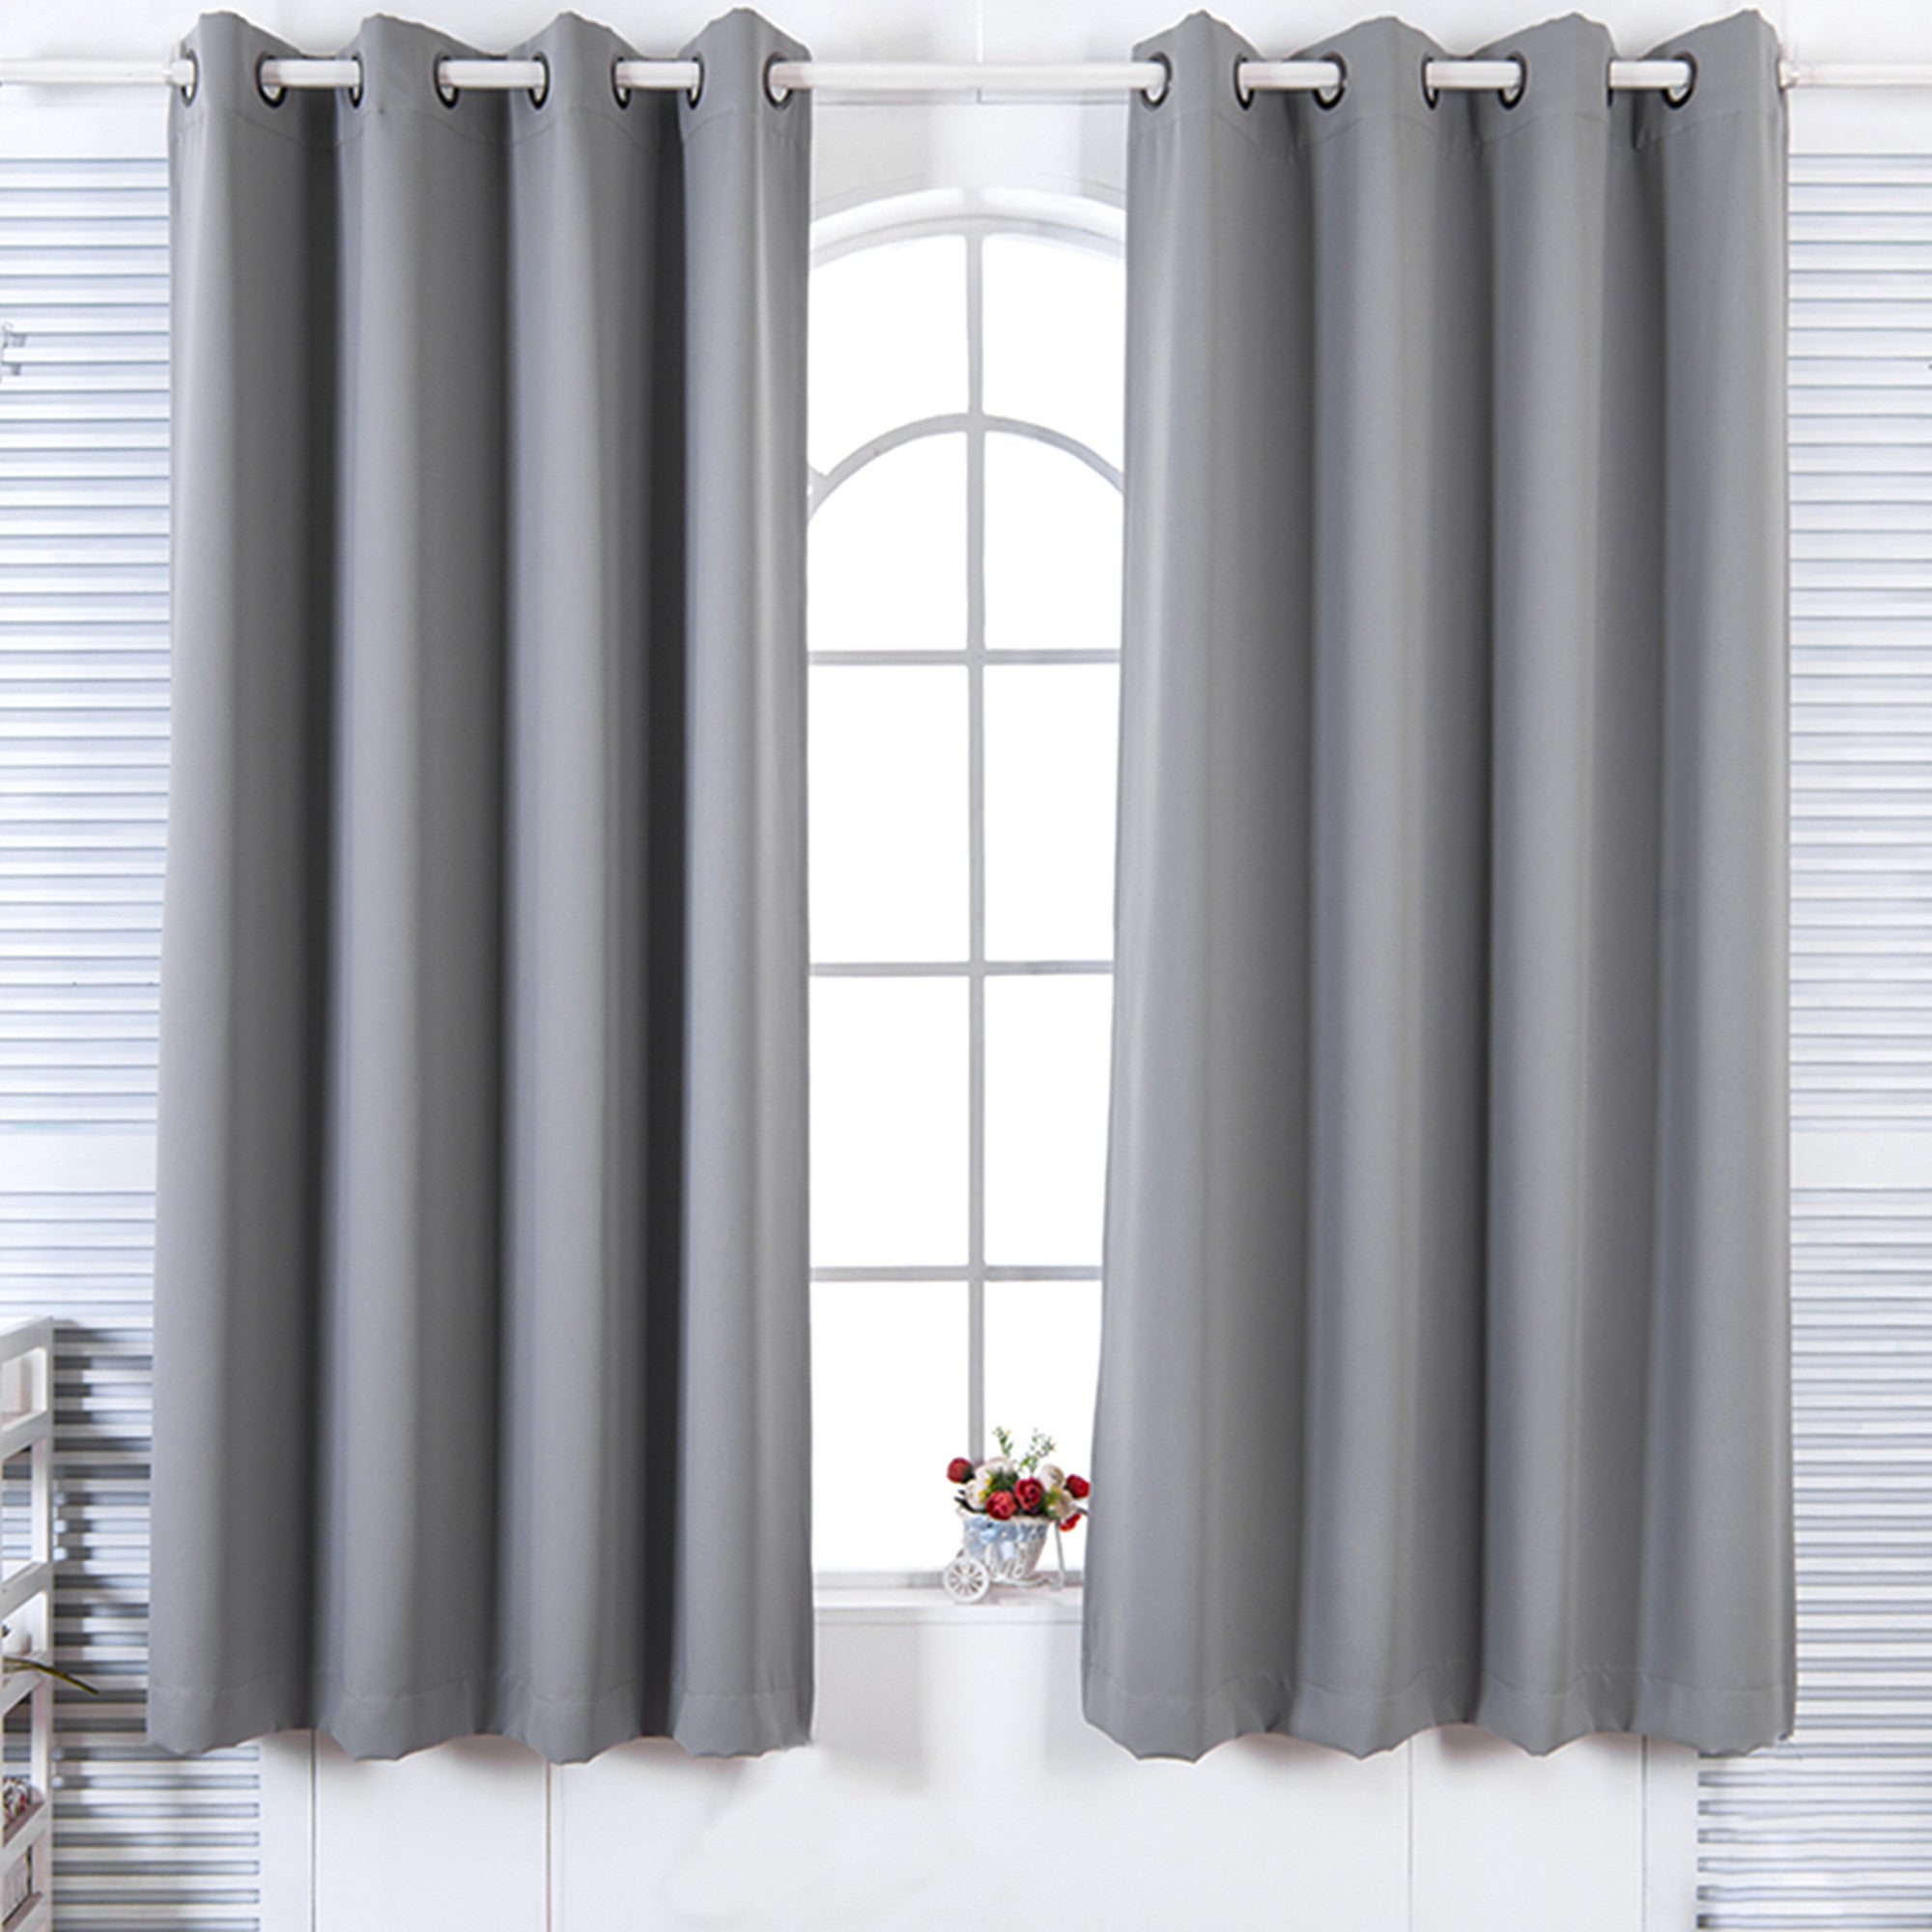 Teamson Home 63" Lamia Premium Solid Insulated Thermal Blackout Window Curtain Panels with Grommets, Fossil Gray